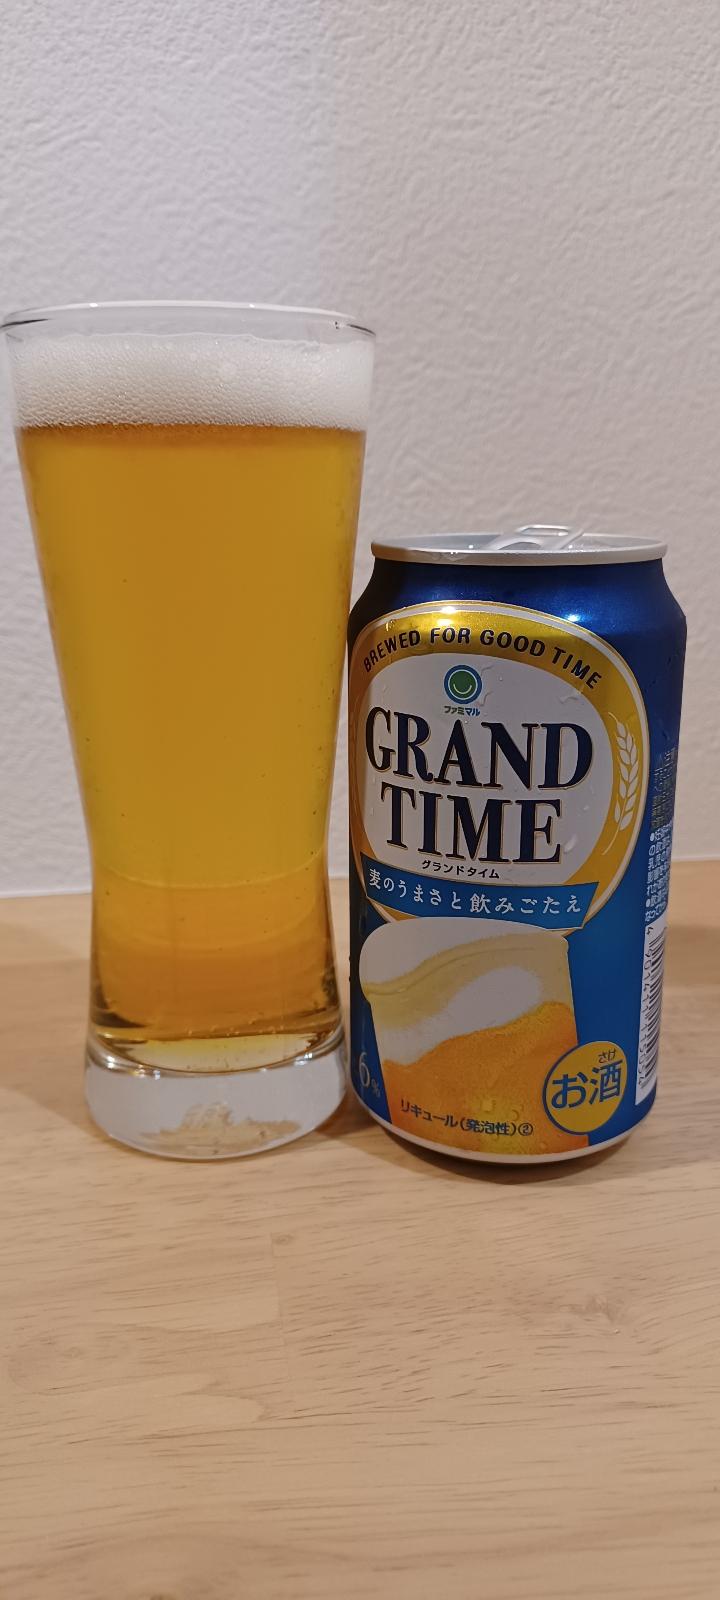 Grand Time